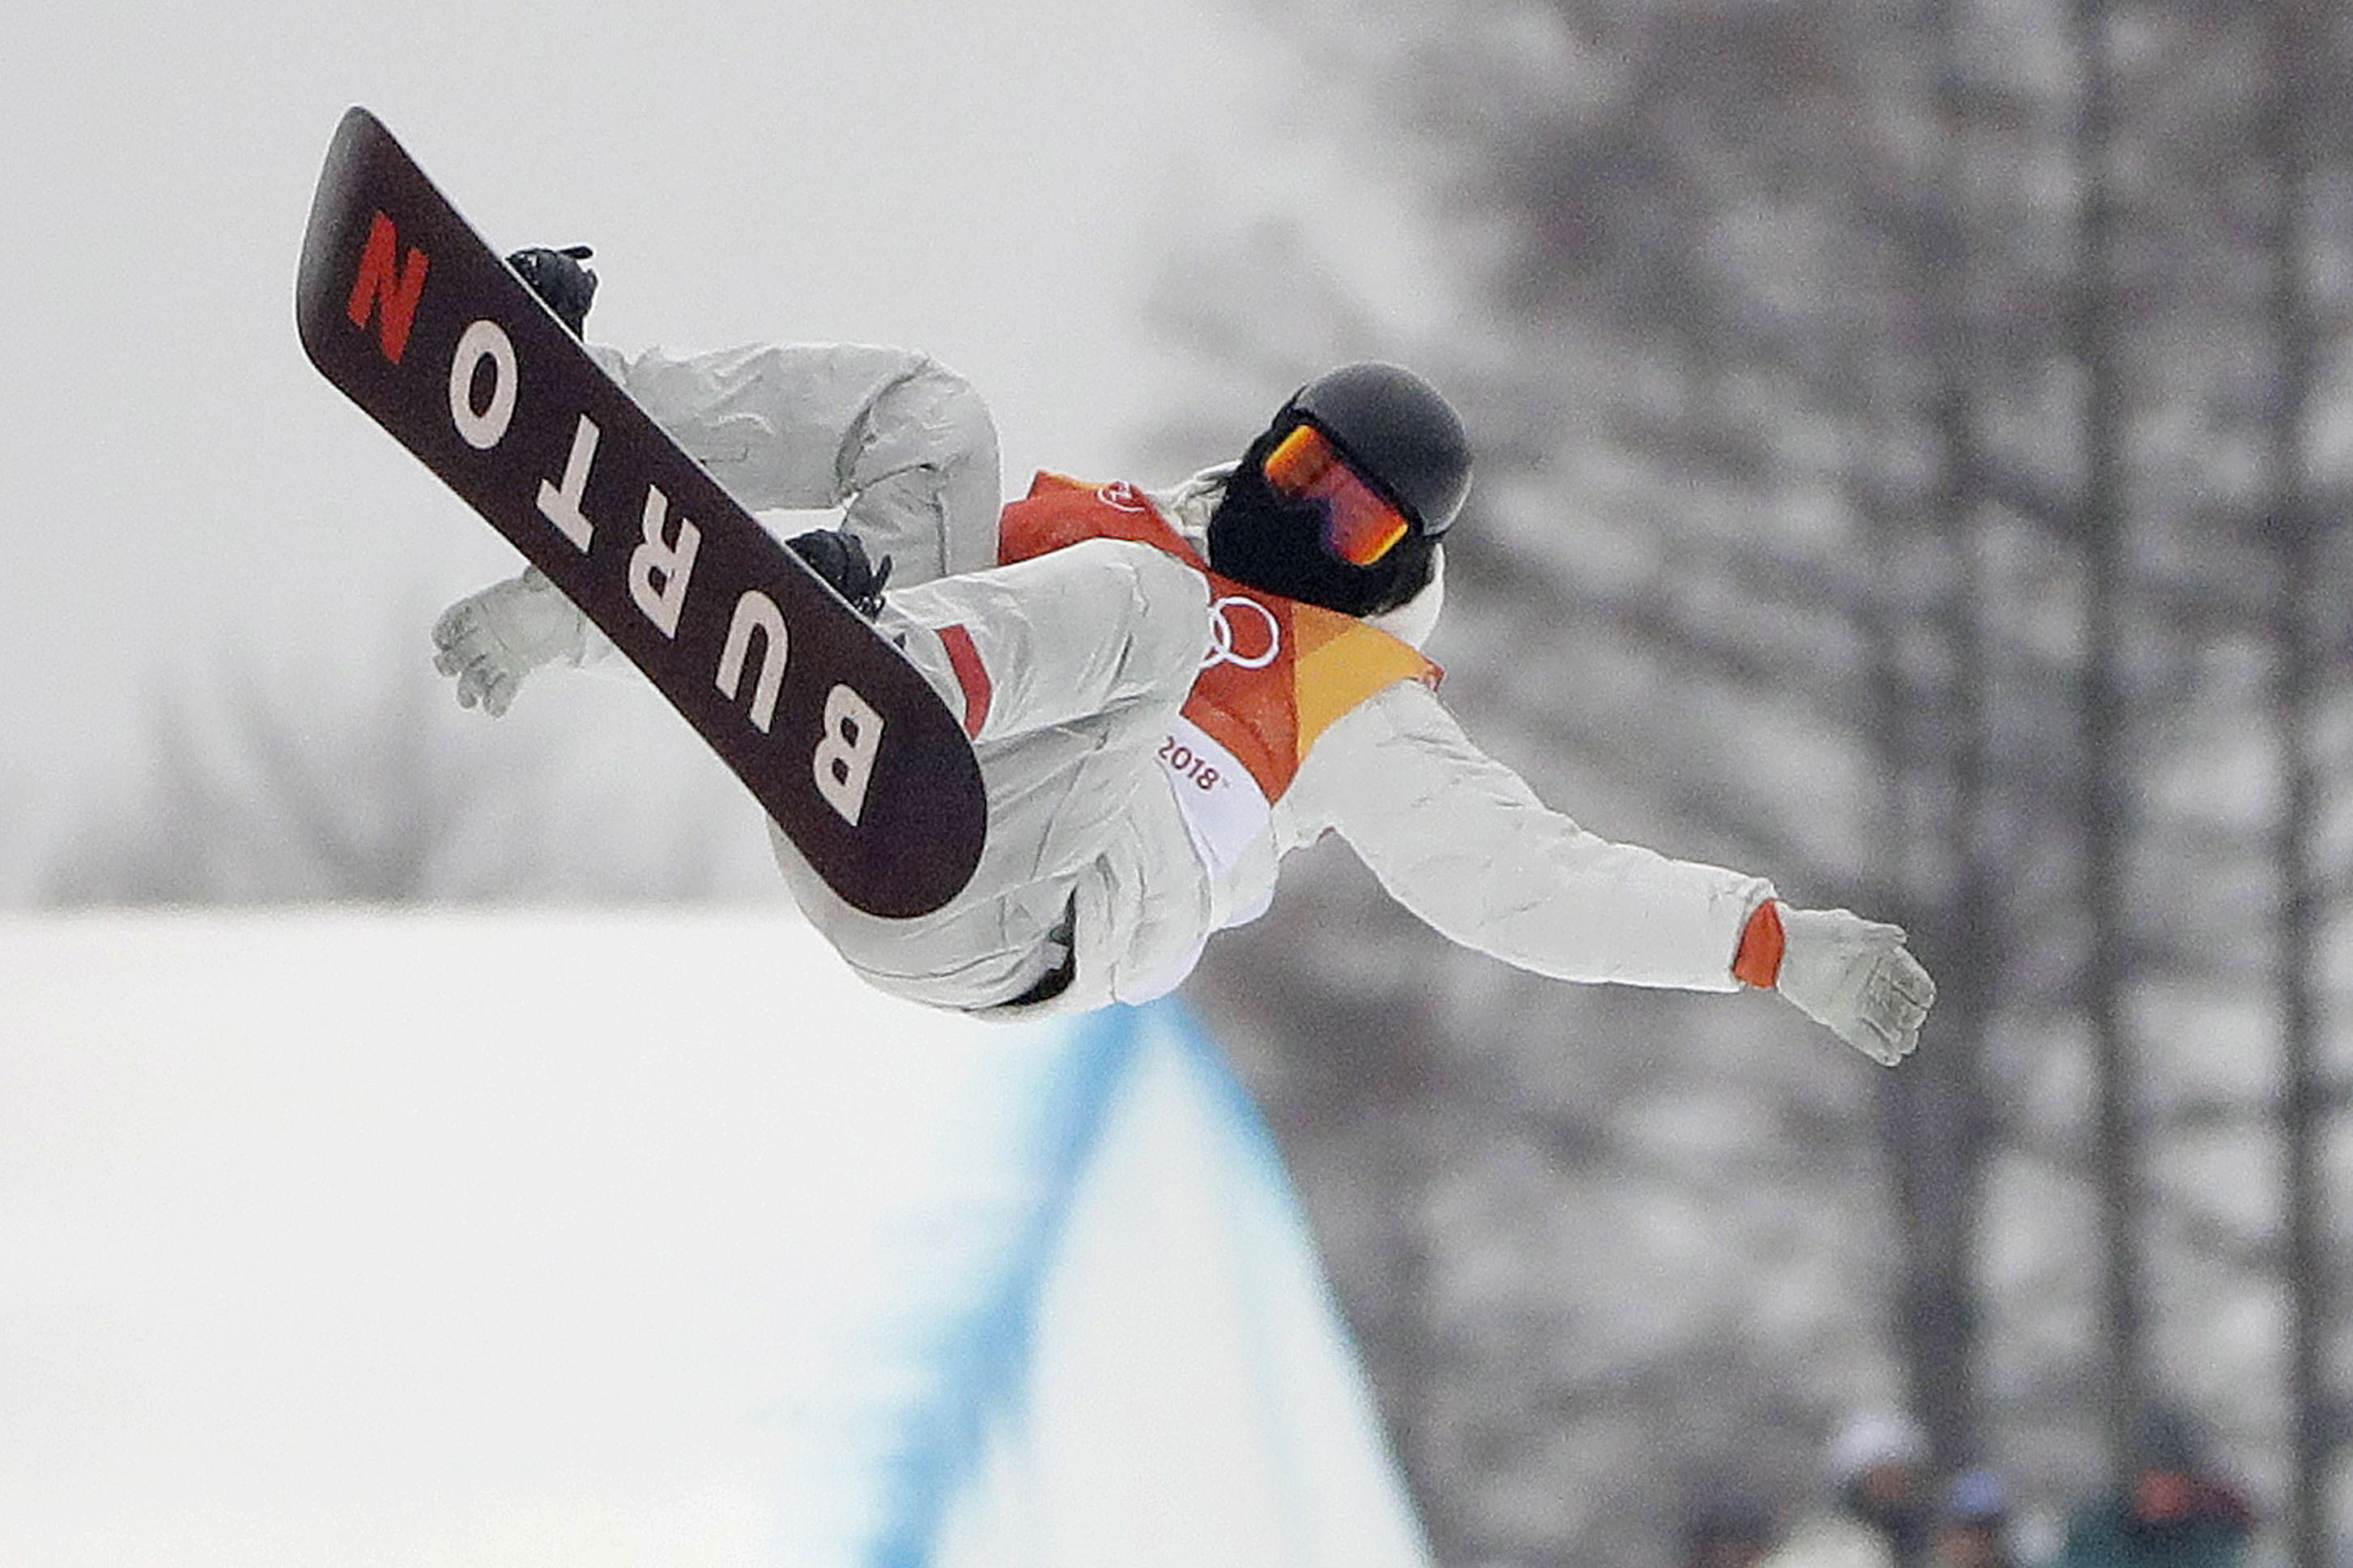 Shaun White back on top of the Olympic snowboarding world